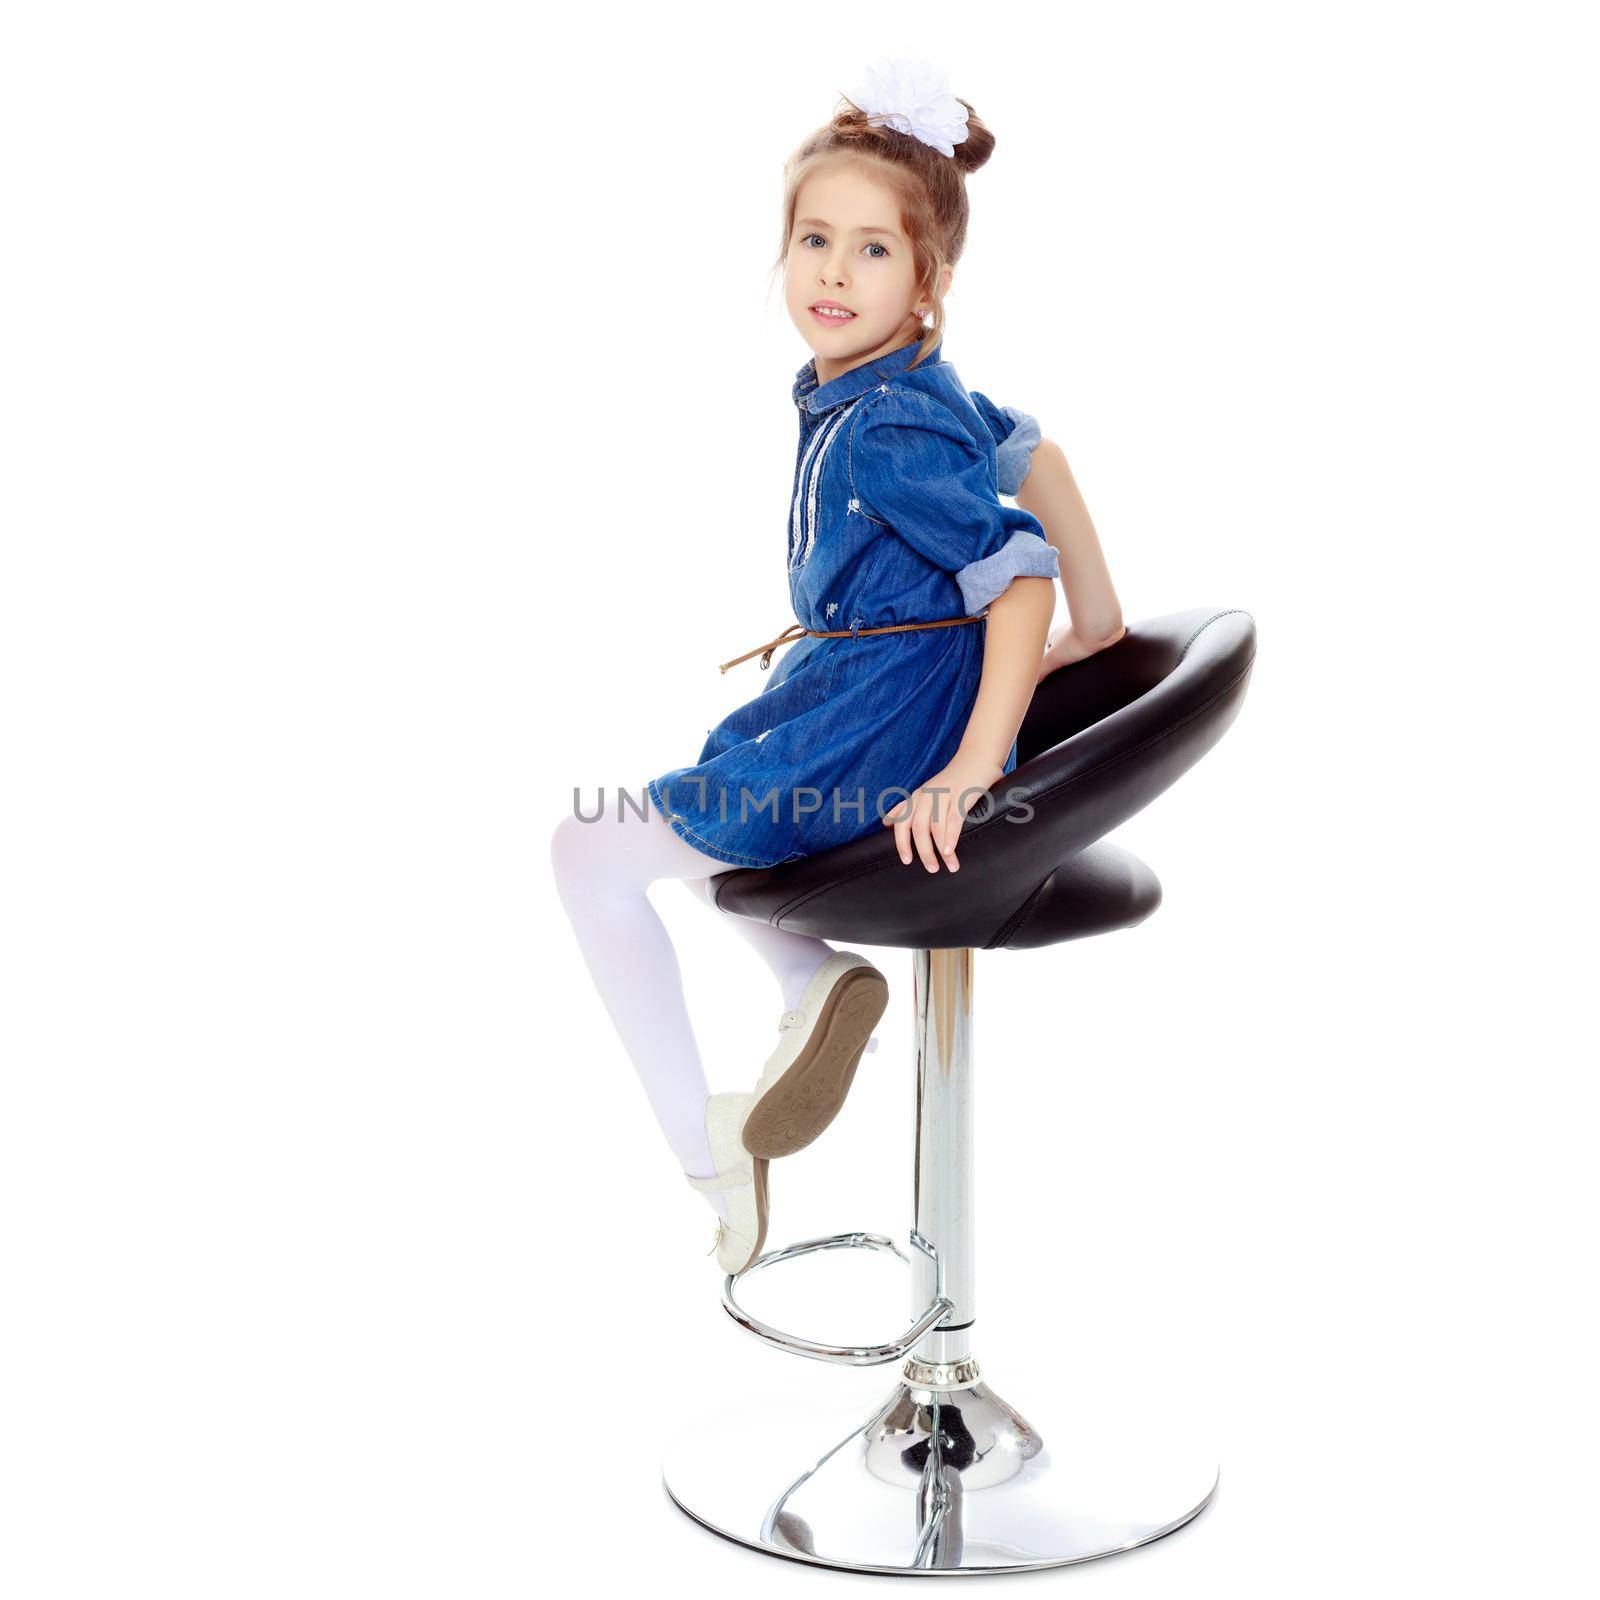 The little blonde girl with a large white bow on the head and short denim dress.She poses on a revolving chair.Isolated on white background.